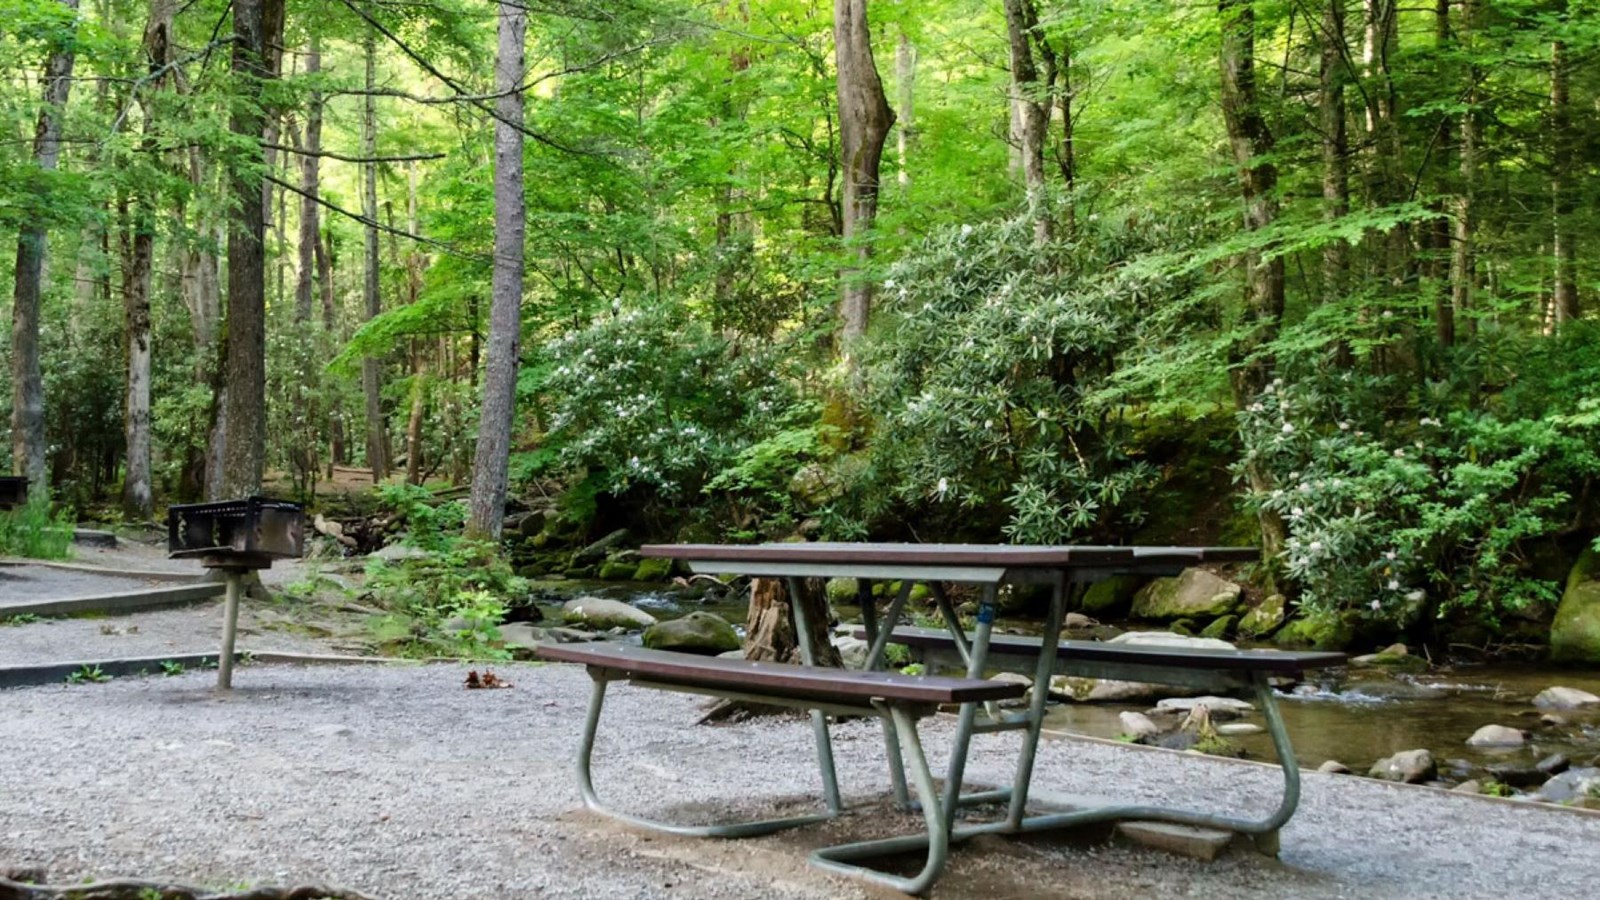 A wooden picnic table with a metal frame sitting on a gravel pad near a grill surrounded by trees.